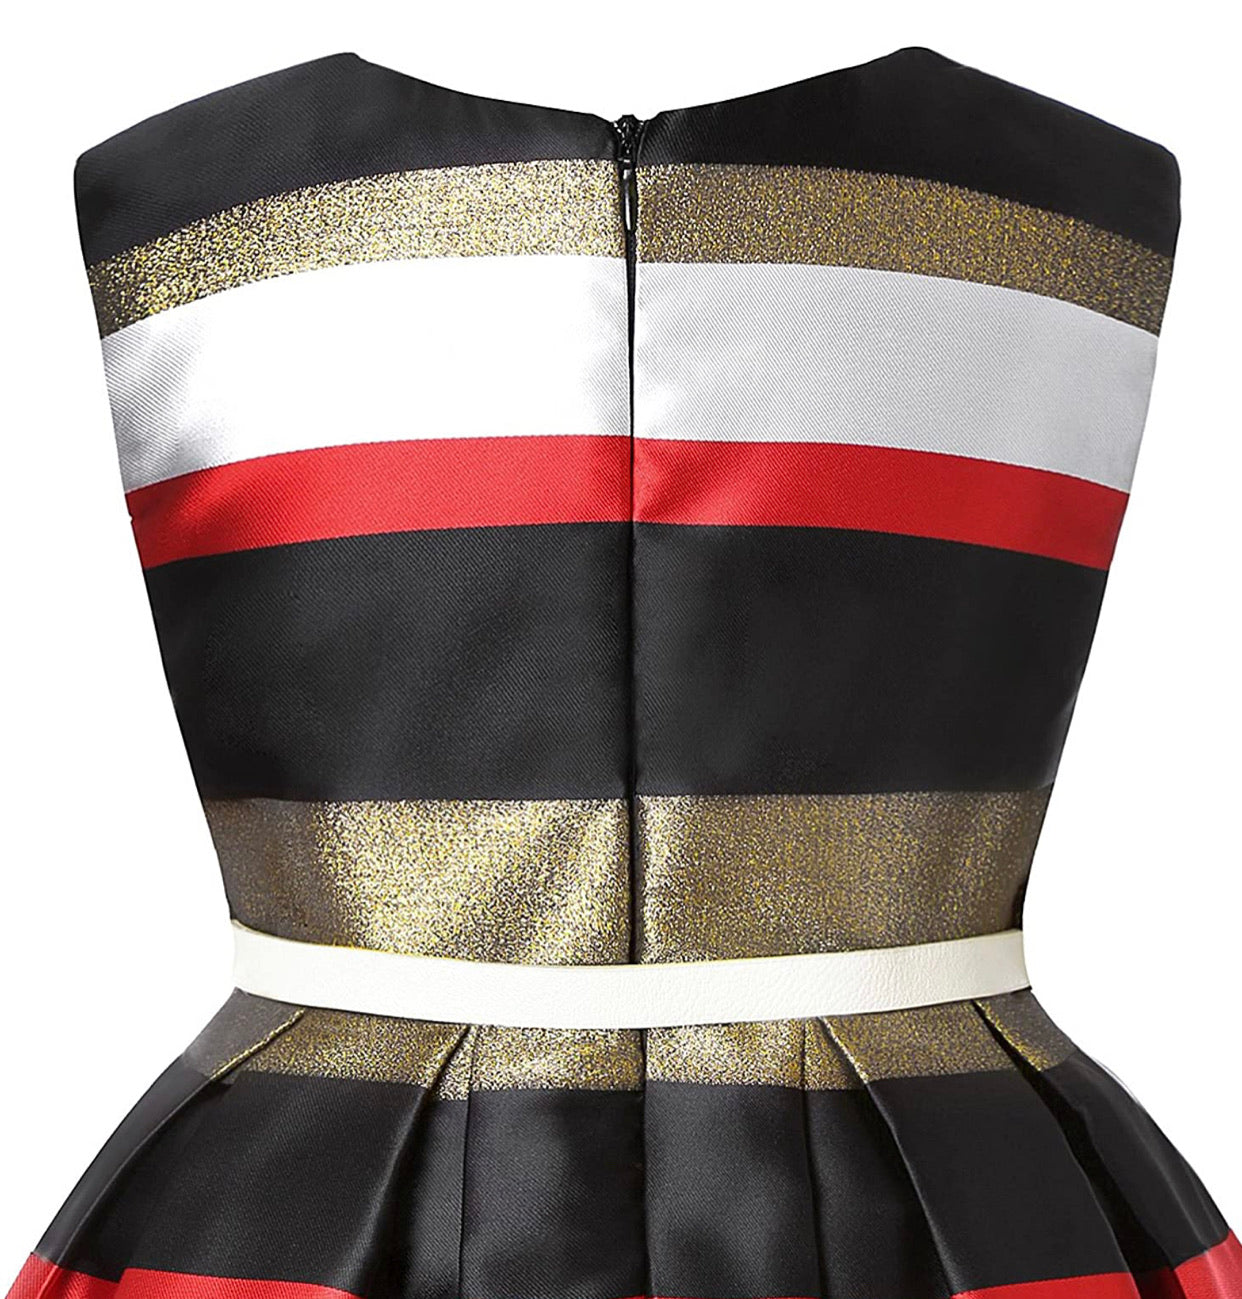 Little girl’s gold, red, and black Striped Party Dress, Sizes 2T - 14 years